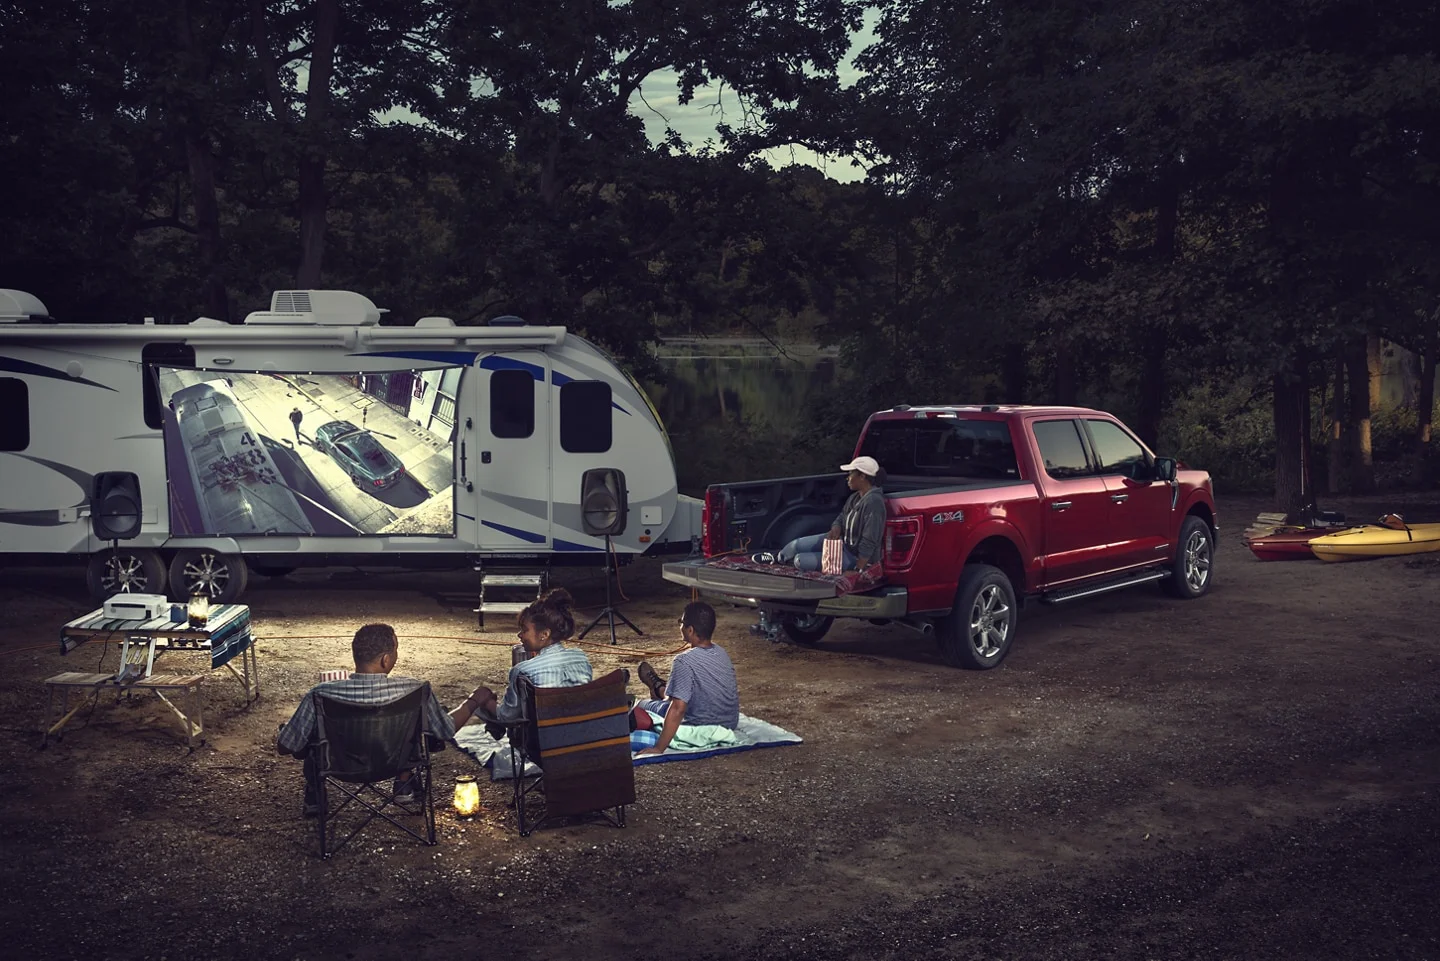 Family camping watching a movie outside with a red F-150